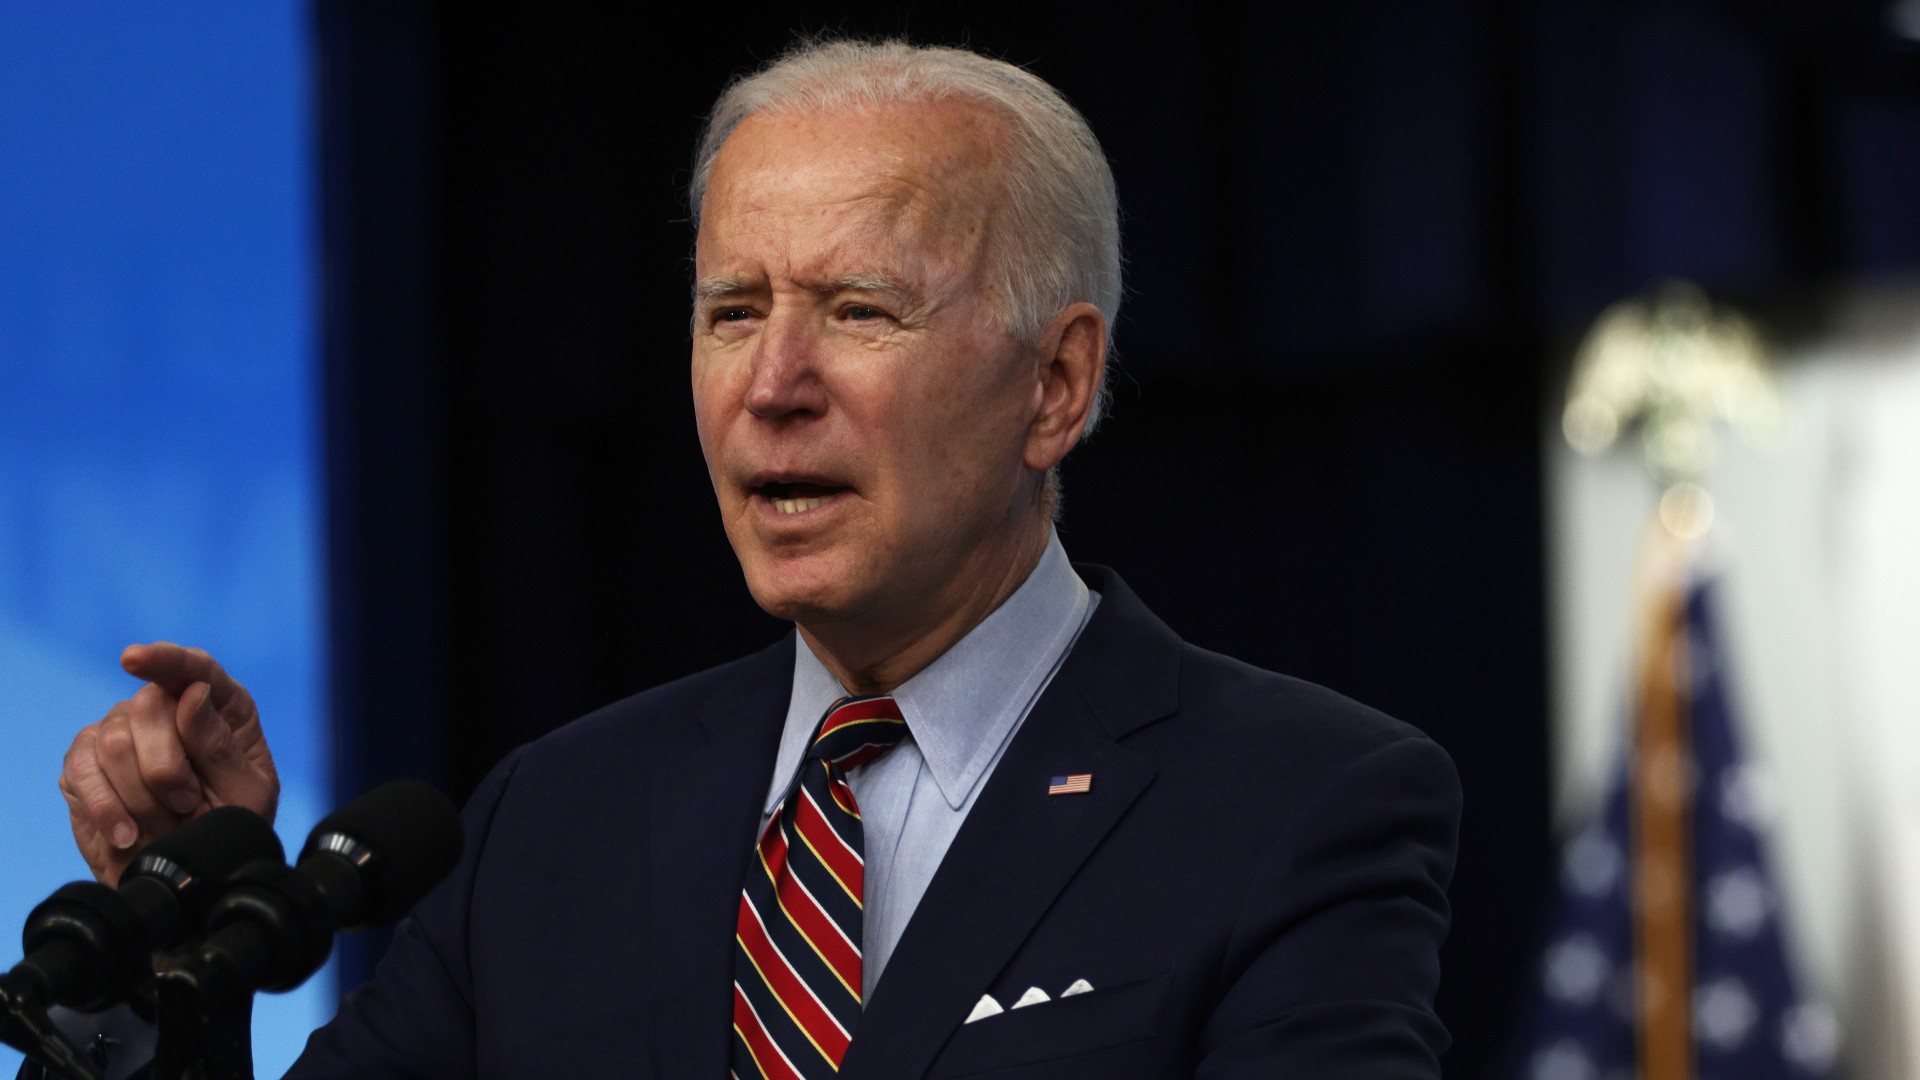 Biden to withdraw 'hundreds of troops from Middle East'